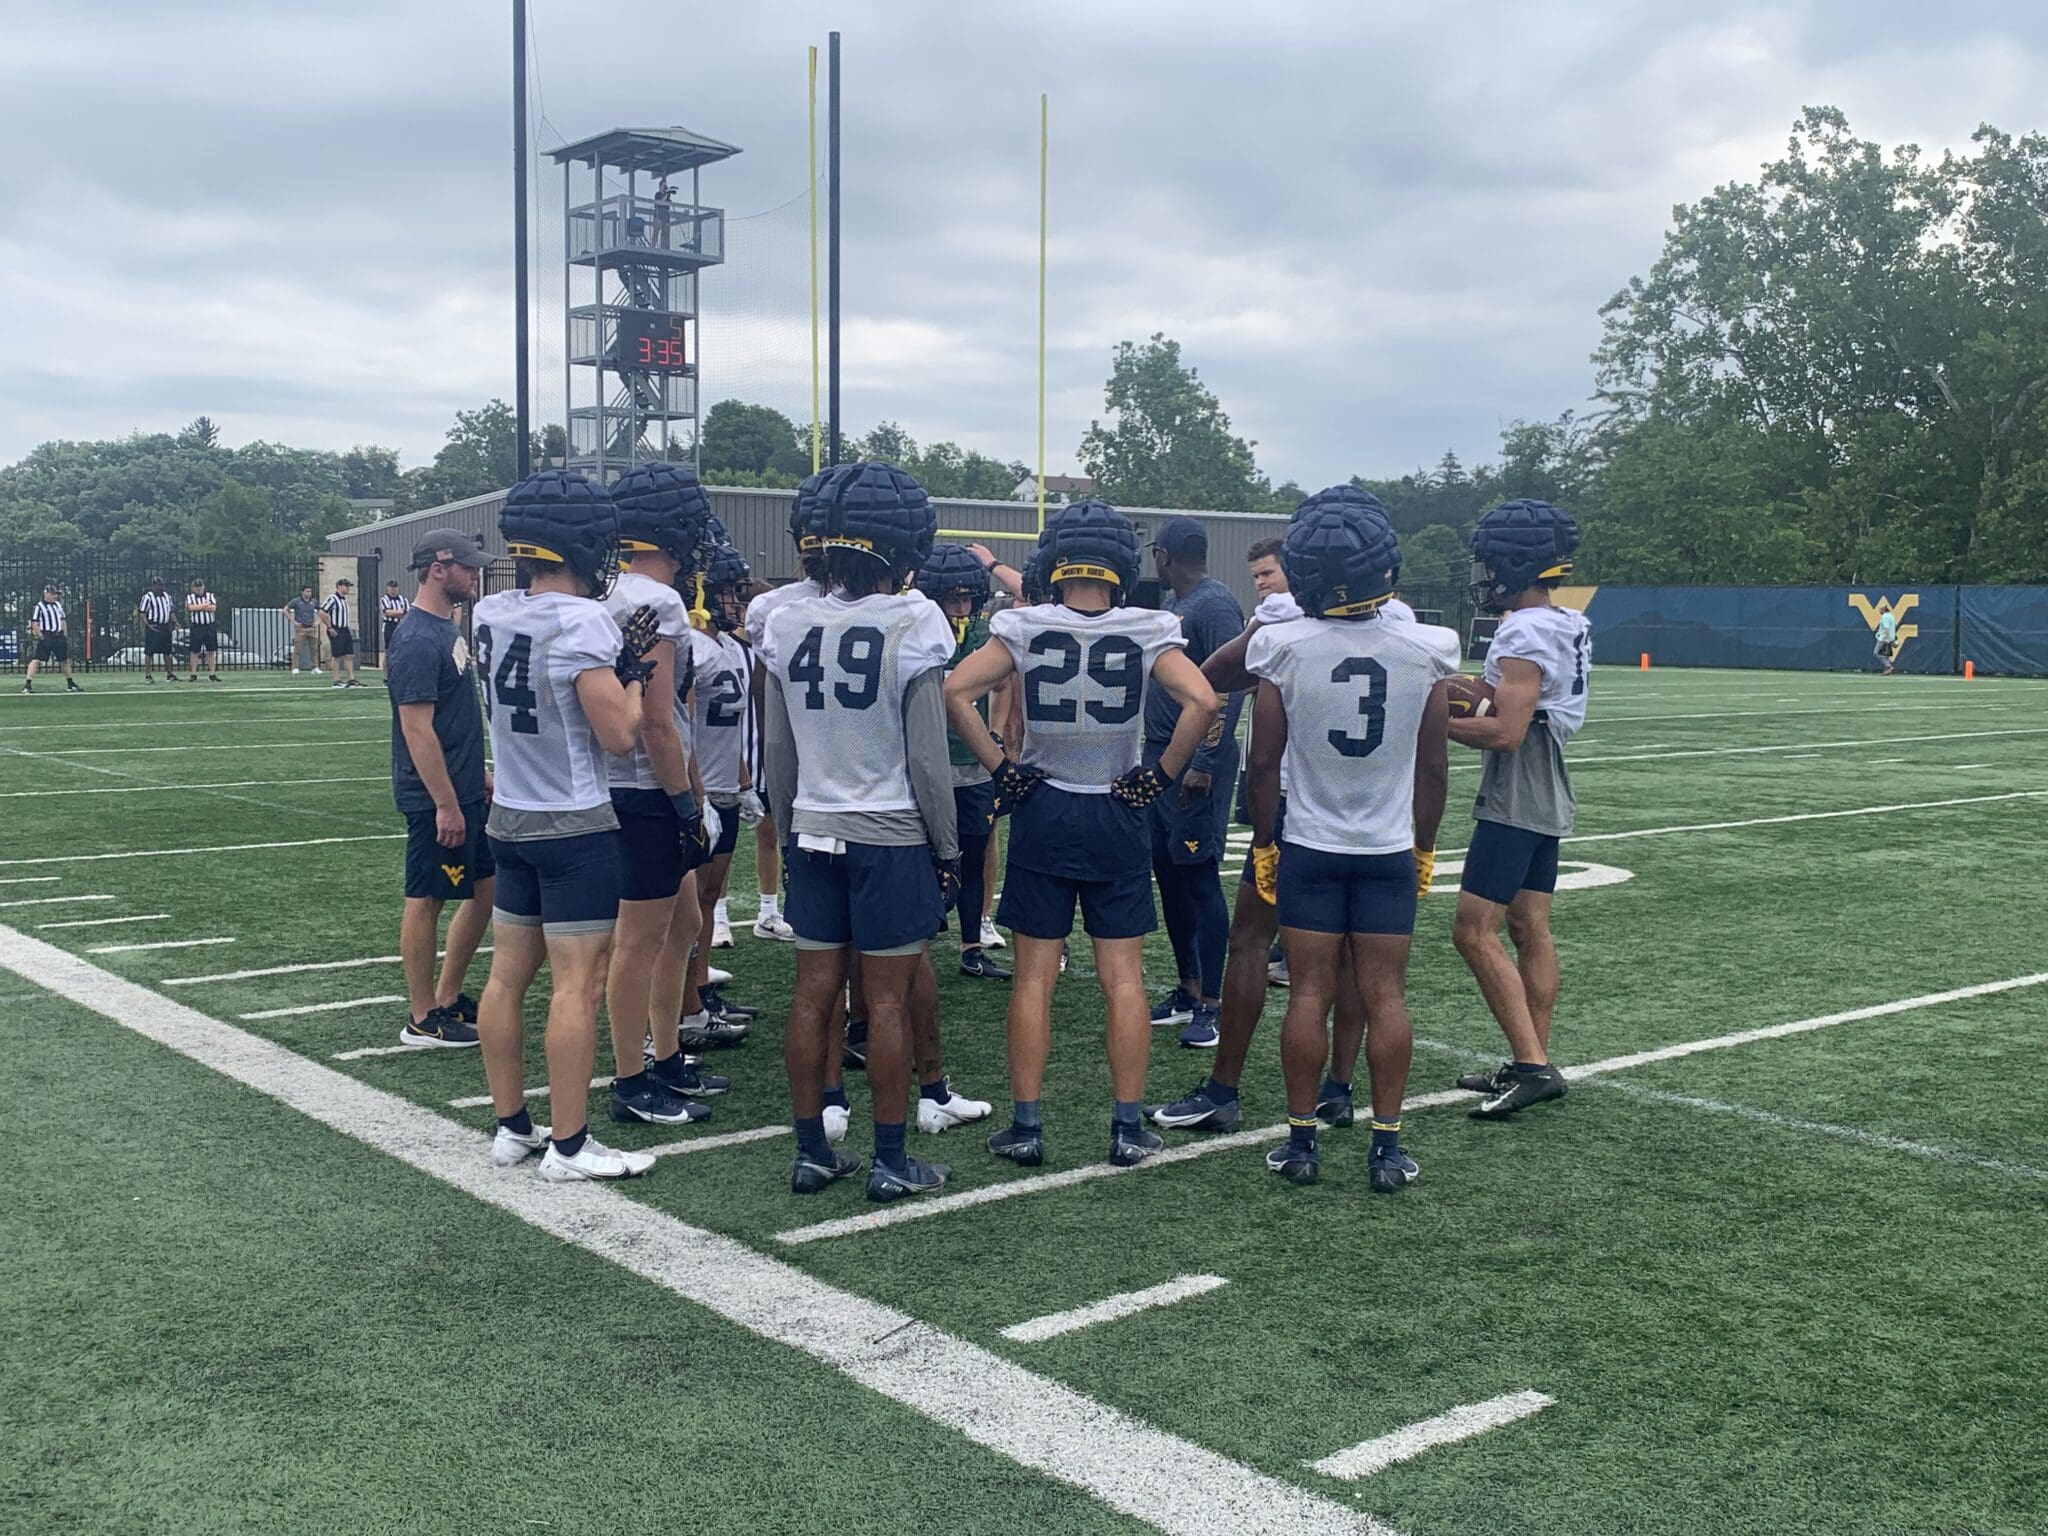 WVU Football players at practice